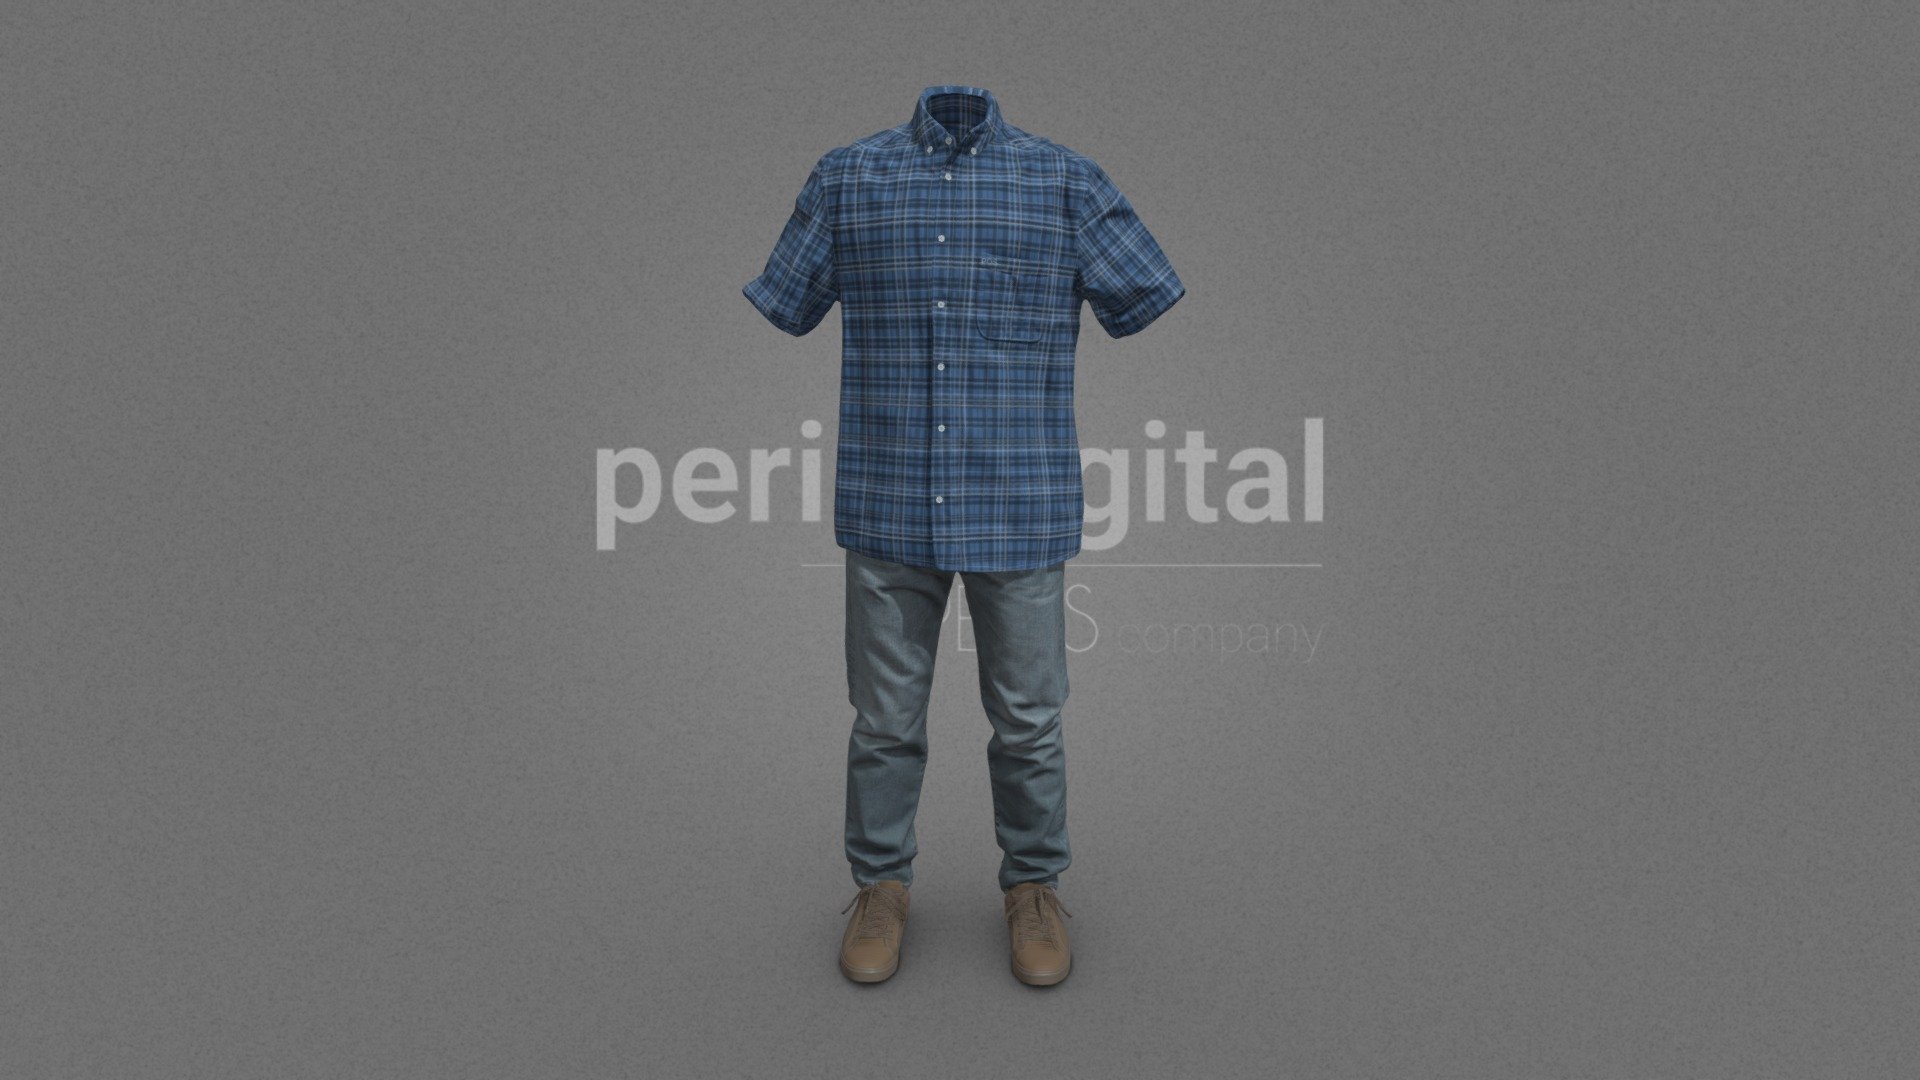 Blue short-sleeved tartan shirt, blue regular denim trousers, beige sneakers with knotted laces.


PERIS DIGITAL HIGH QUALITY 3D CLOTHING



They are optimized for use in medium/high poly 3D scenes and optimized for rendering.

We do not include characters, but they are positioned for you to include and adjust your own character.

They have a LOW Poly Mesh (LODRIG) inside the Blender file (included in the AdditionalFiles), which you can use for vertex weighting or cloth simulation and thus, make the transfer of vertices or property masks from the LOW to the HIGH model.

We have included in AddiotionalFiles, the texture maps in high resolution, as well as the Displacement maps in high resolution too, so you can perform extreme point of view with your 3D cameras.

With the Blender file (included in AdditionalFiles) you will be able to edit any aspect of the set .

Enjoy it!

Web: https://peris.digital/ - Daily Clothing Series - Blue - Buy Royalty Free 3D model by Peris Digital (@perisdigital) 3d model